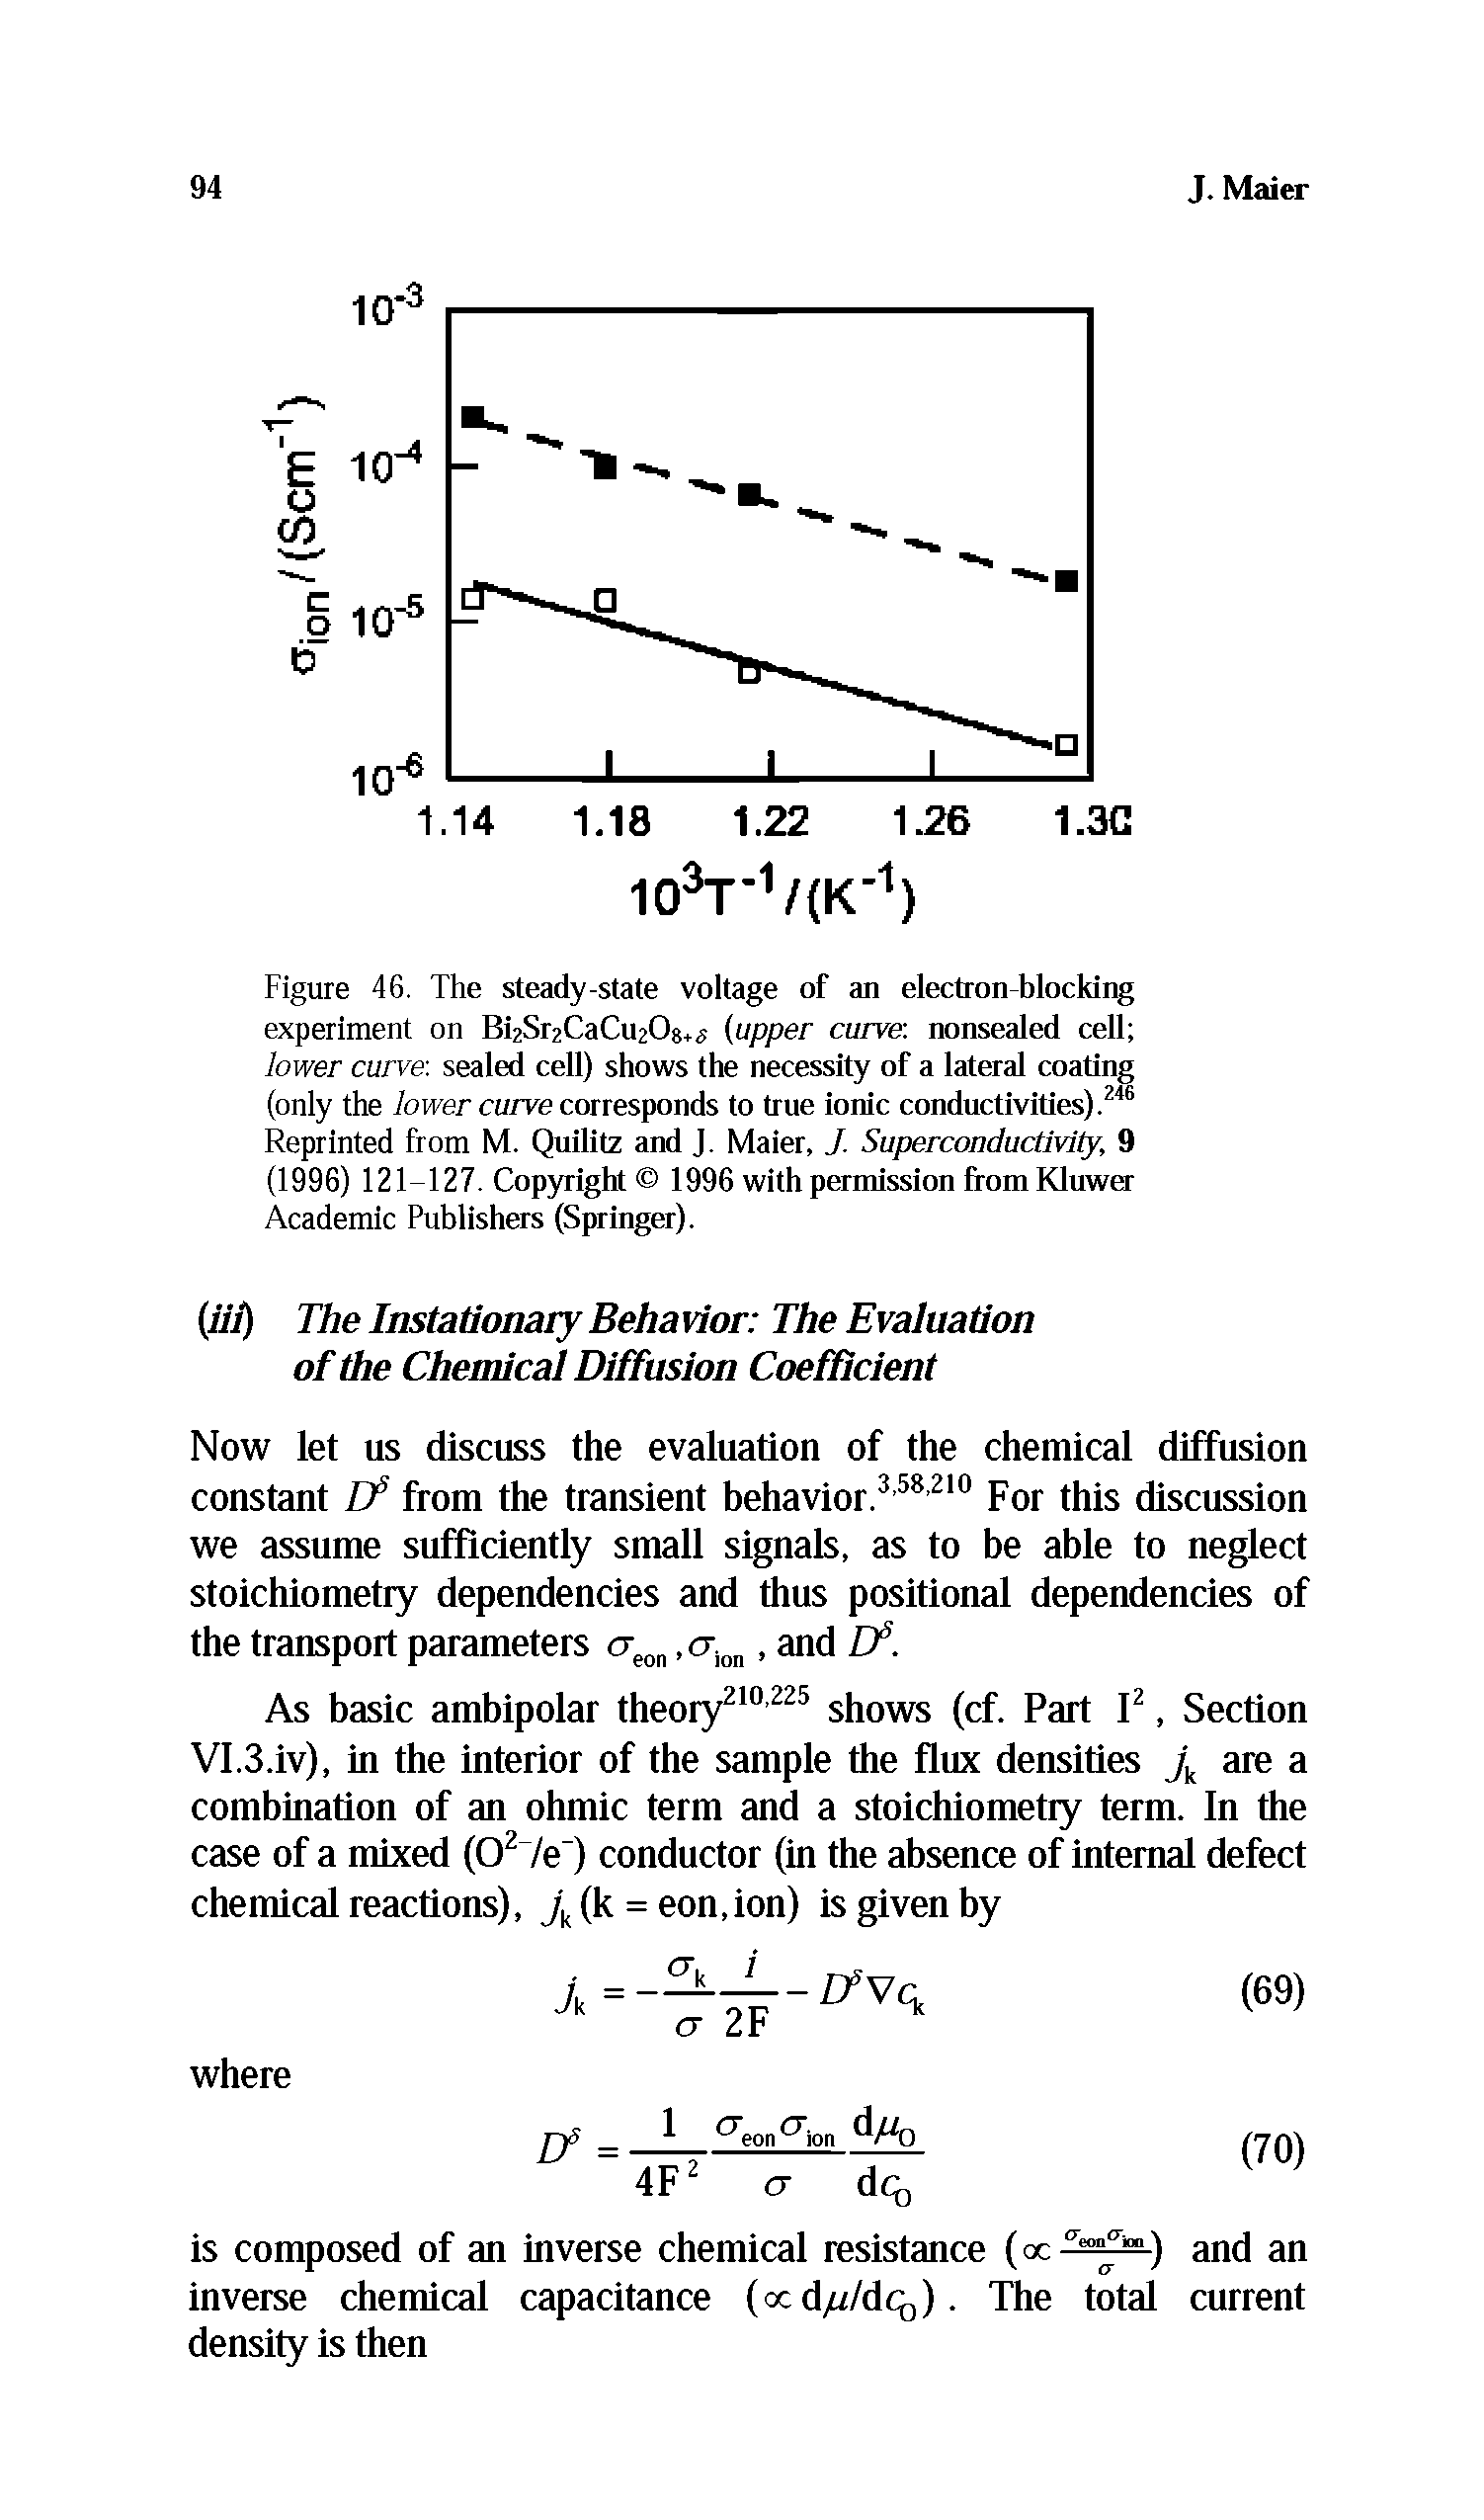 Figure 46. The steady-state voltage of an electron-blocking experiment on ISFSr CaCi Og - (upper curve, nonsealed cell lower curve, sealed cell) shows the necessity of a lateral coating (only the lower curve corresponds to true ionic conductivities).246 Reprinted from M. Quilitz and J. Maier, J. Superconductivity, 9 (1996) 121-127. Copyright 1996 with permission fromKluwer Academic Publishers (Springer).